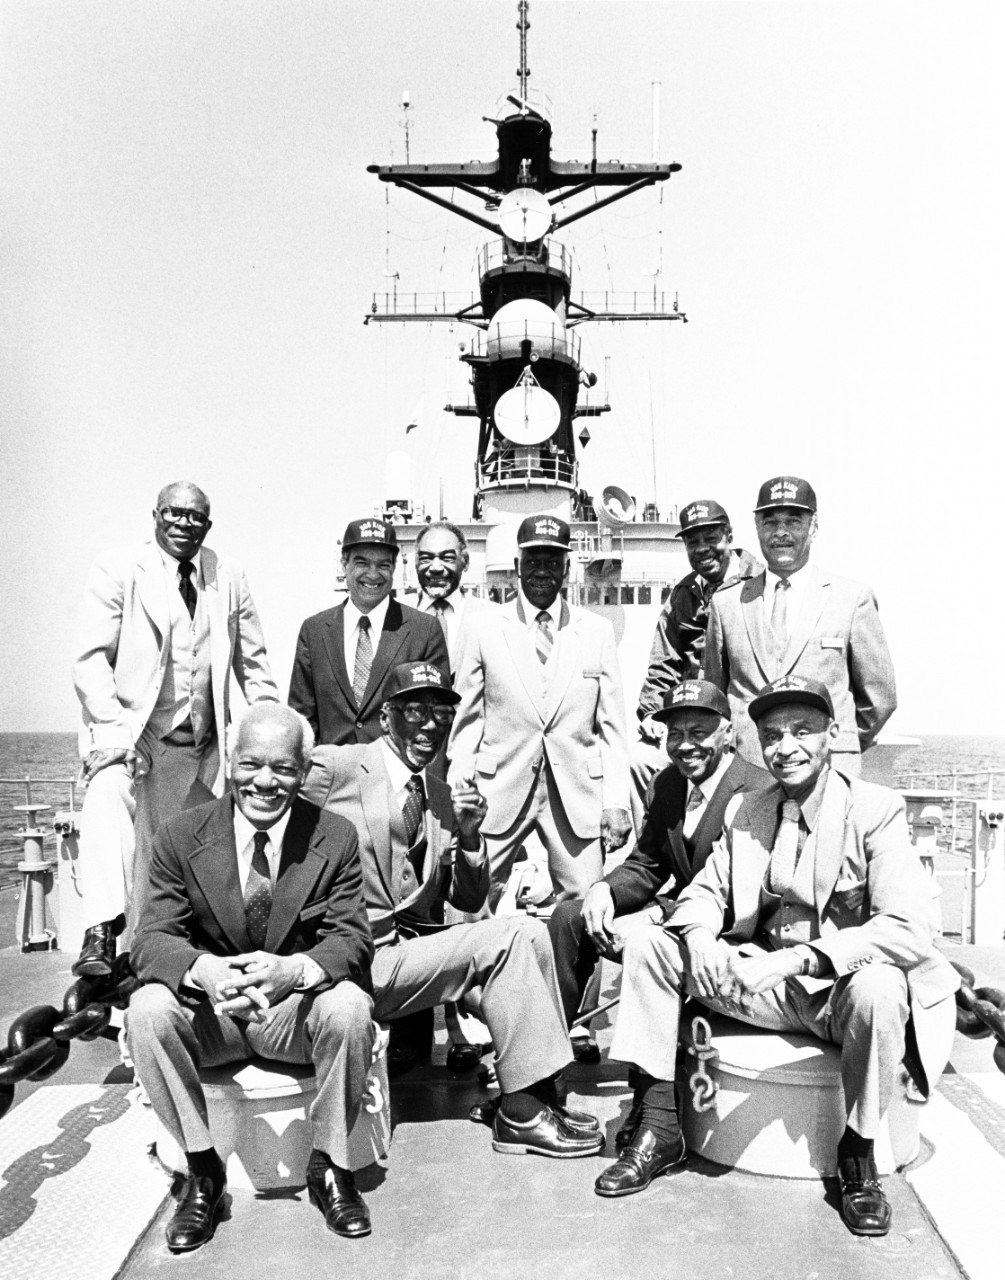 Photo #: NH 95625  Reunion of early African-American U.S. Navy Officers